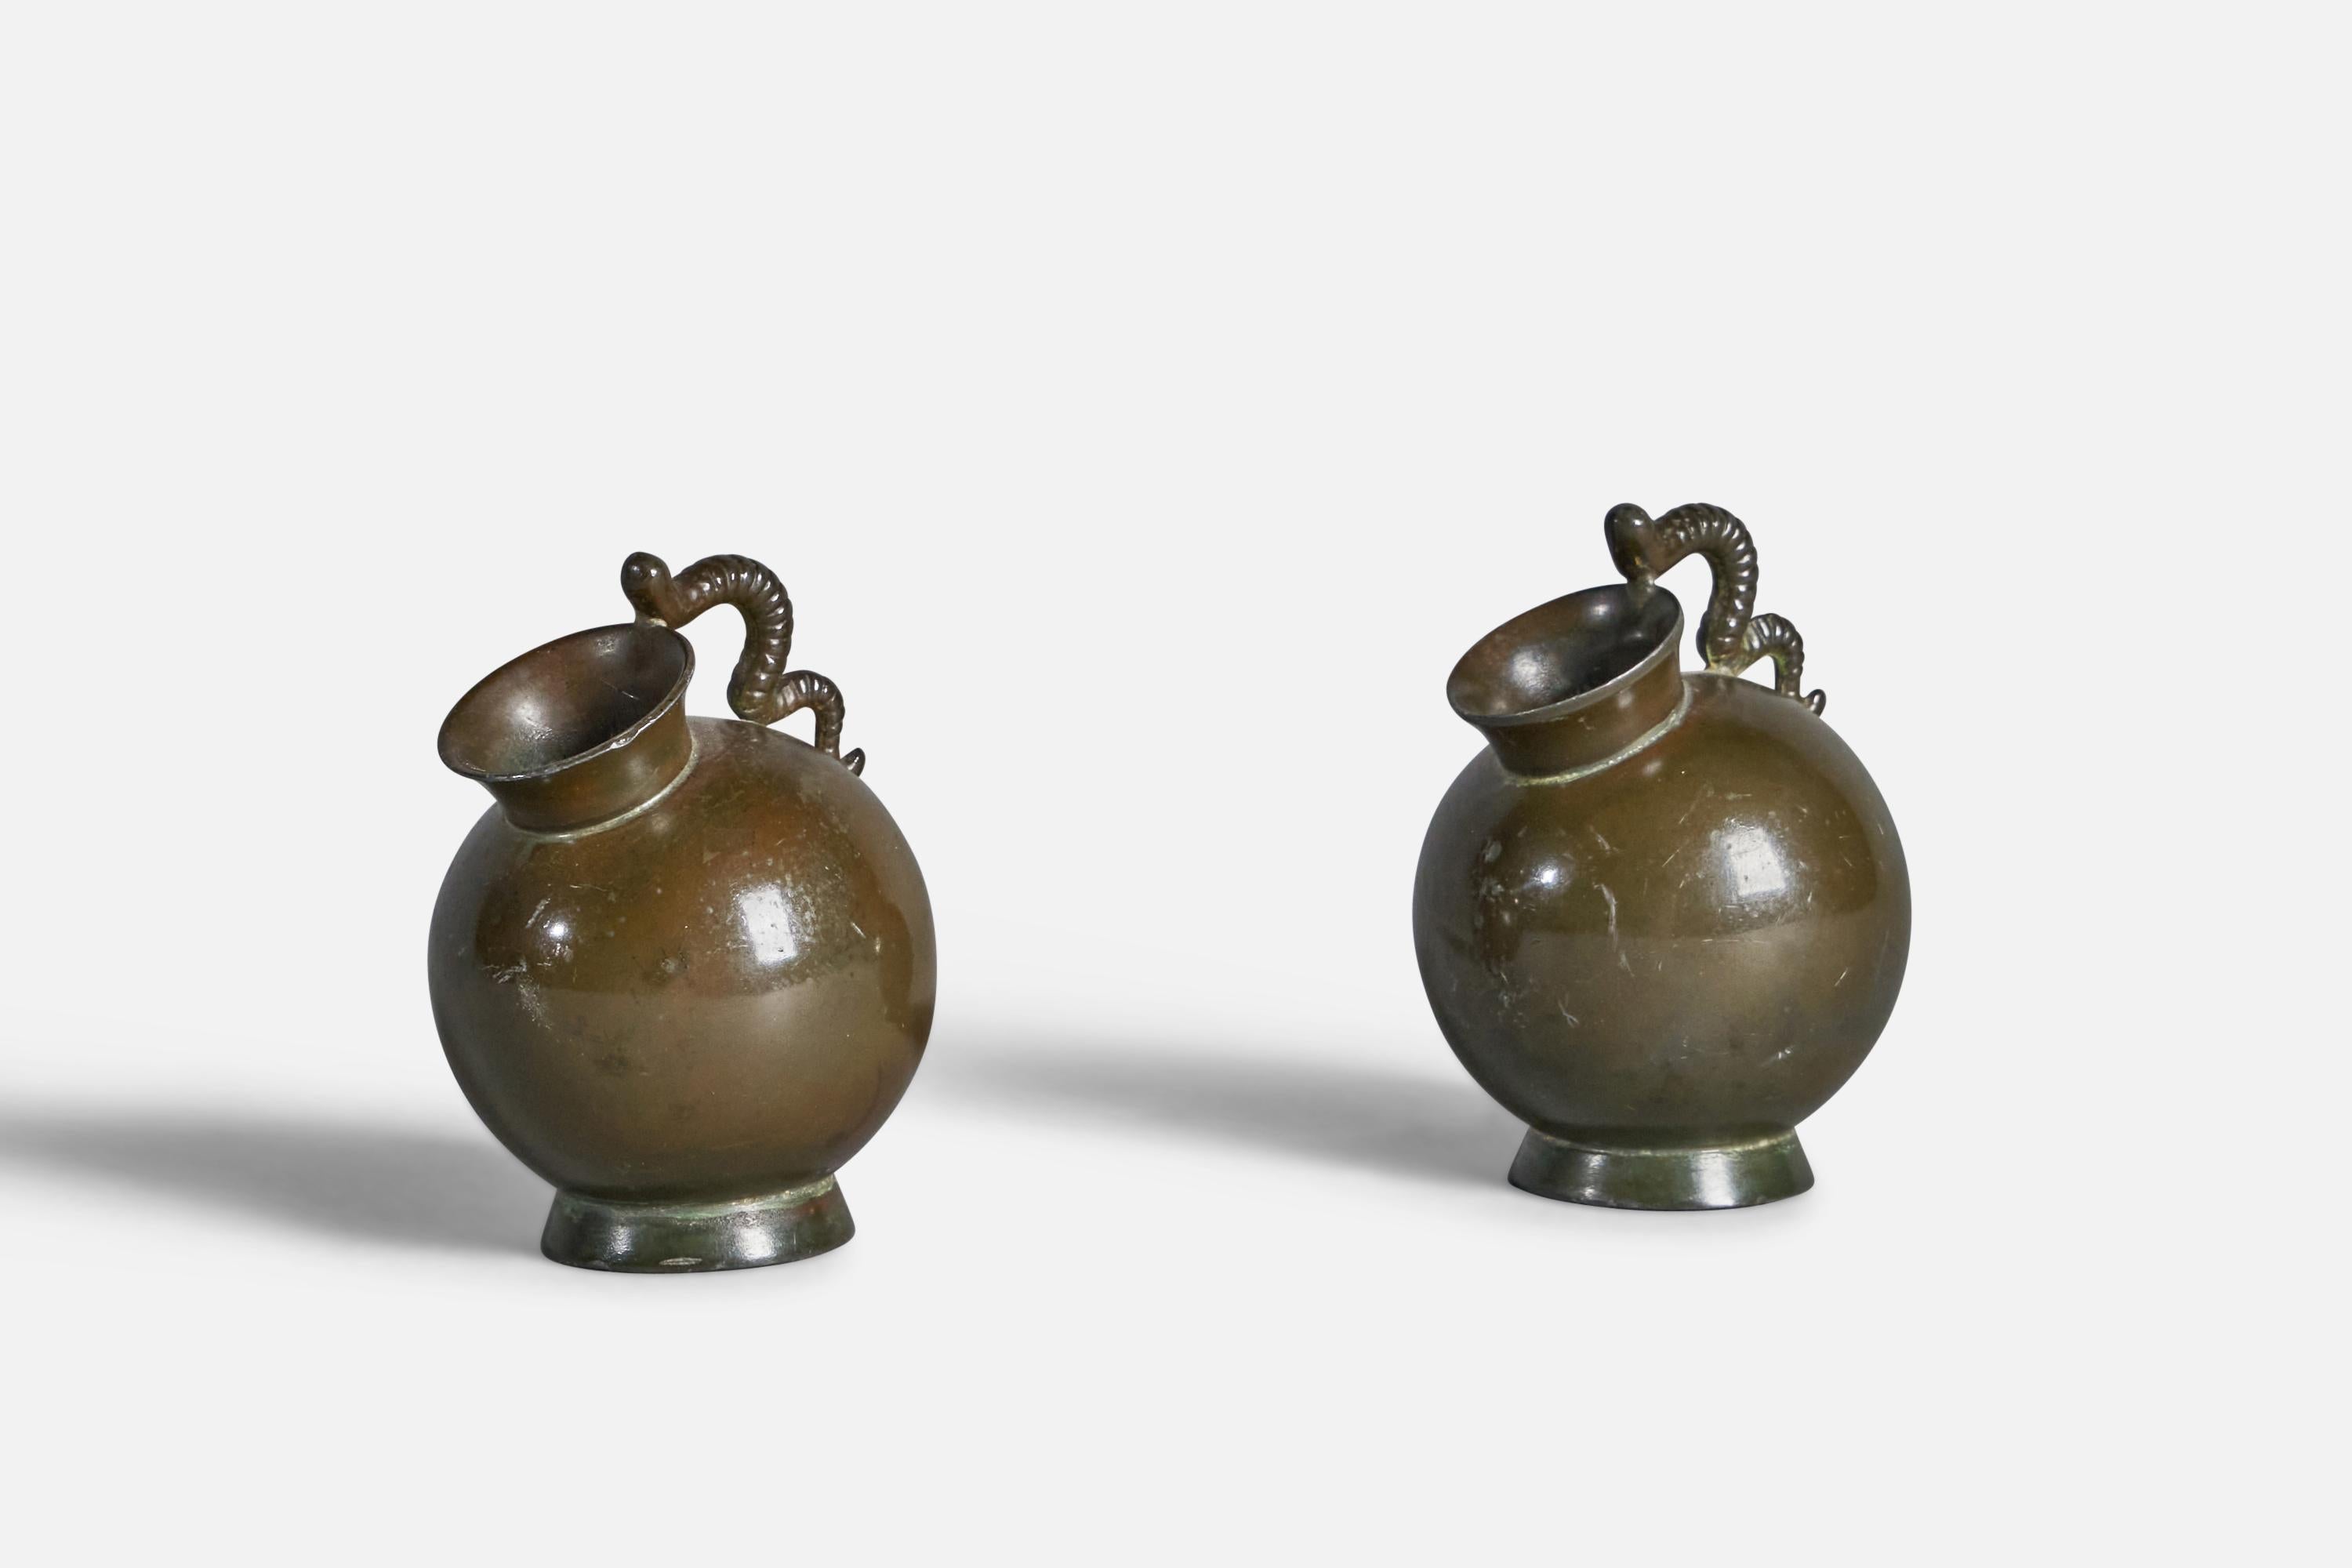 A pair of miniature disko metal pitchers designed and produced by Just Andersen, Denmark, 1930s.

”Denmark Br.H. JUSL 1282” stamp on bottom